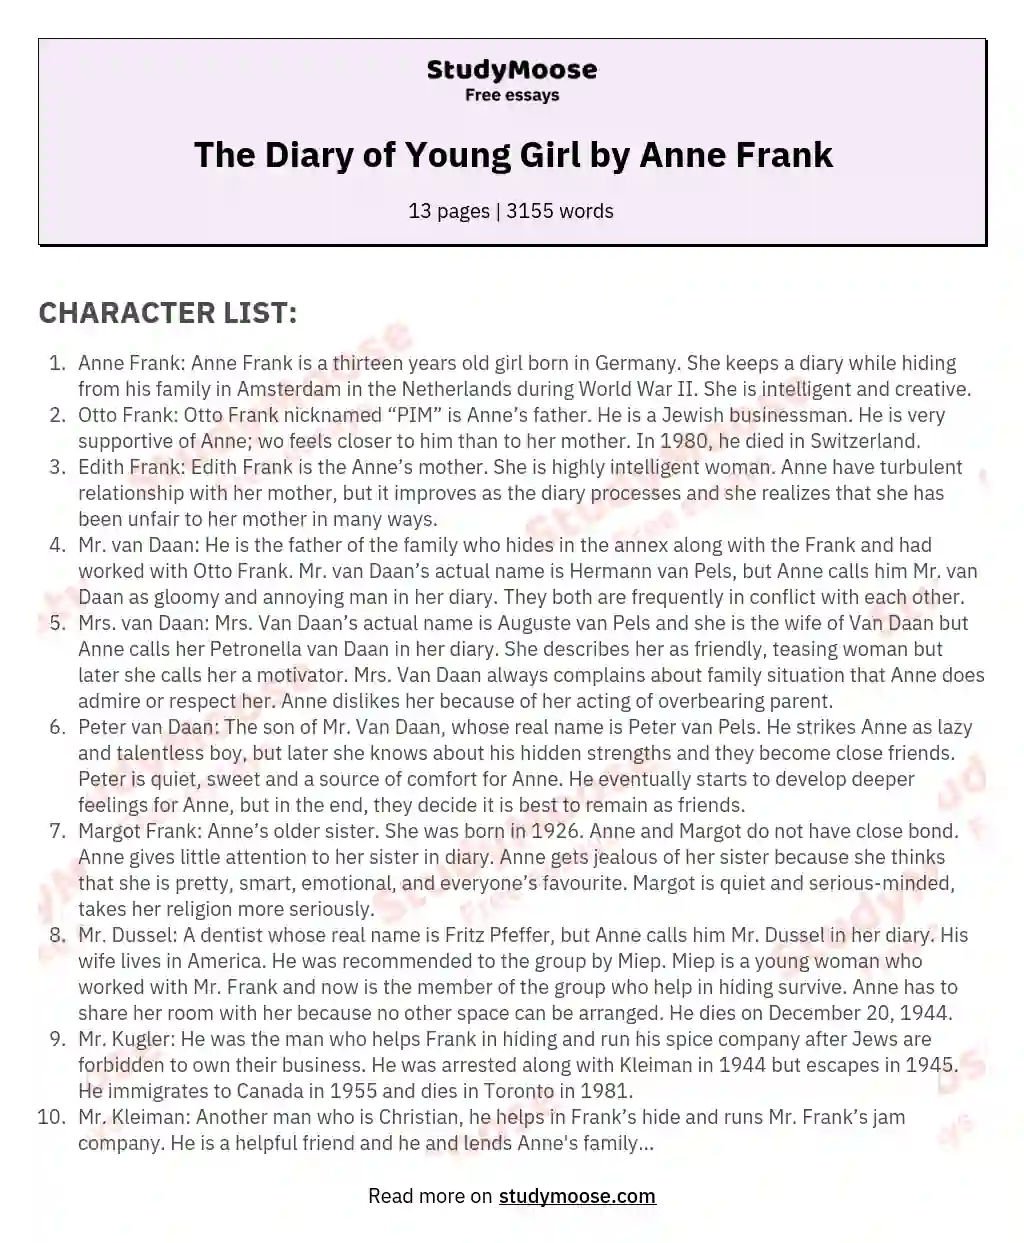 The Diary of Young Girl by Anne Frank